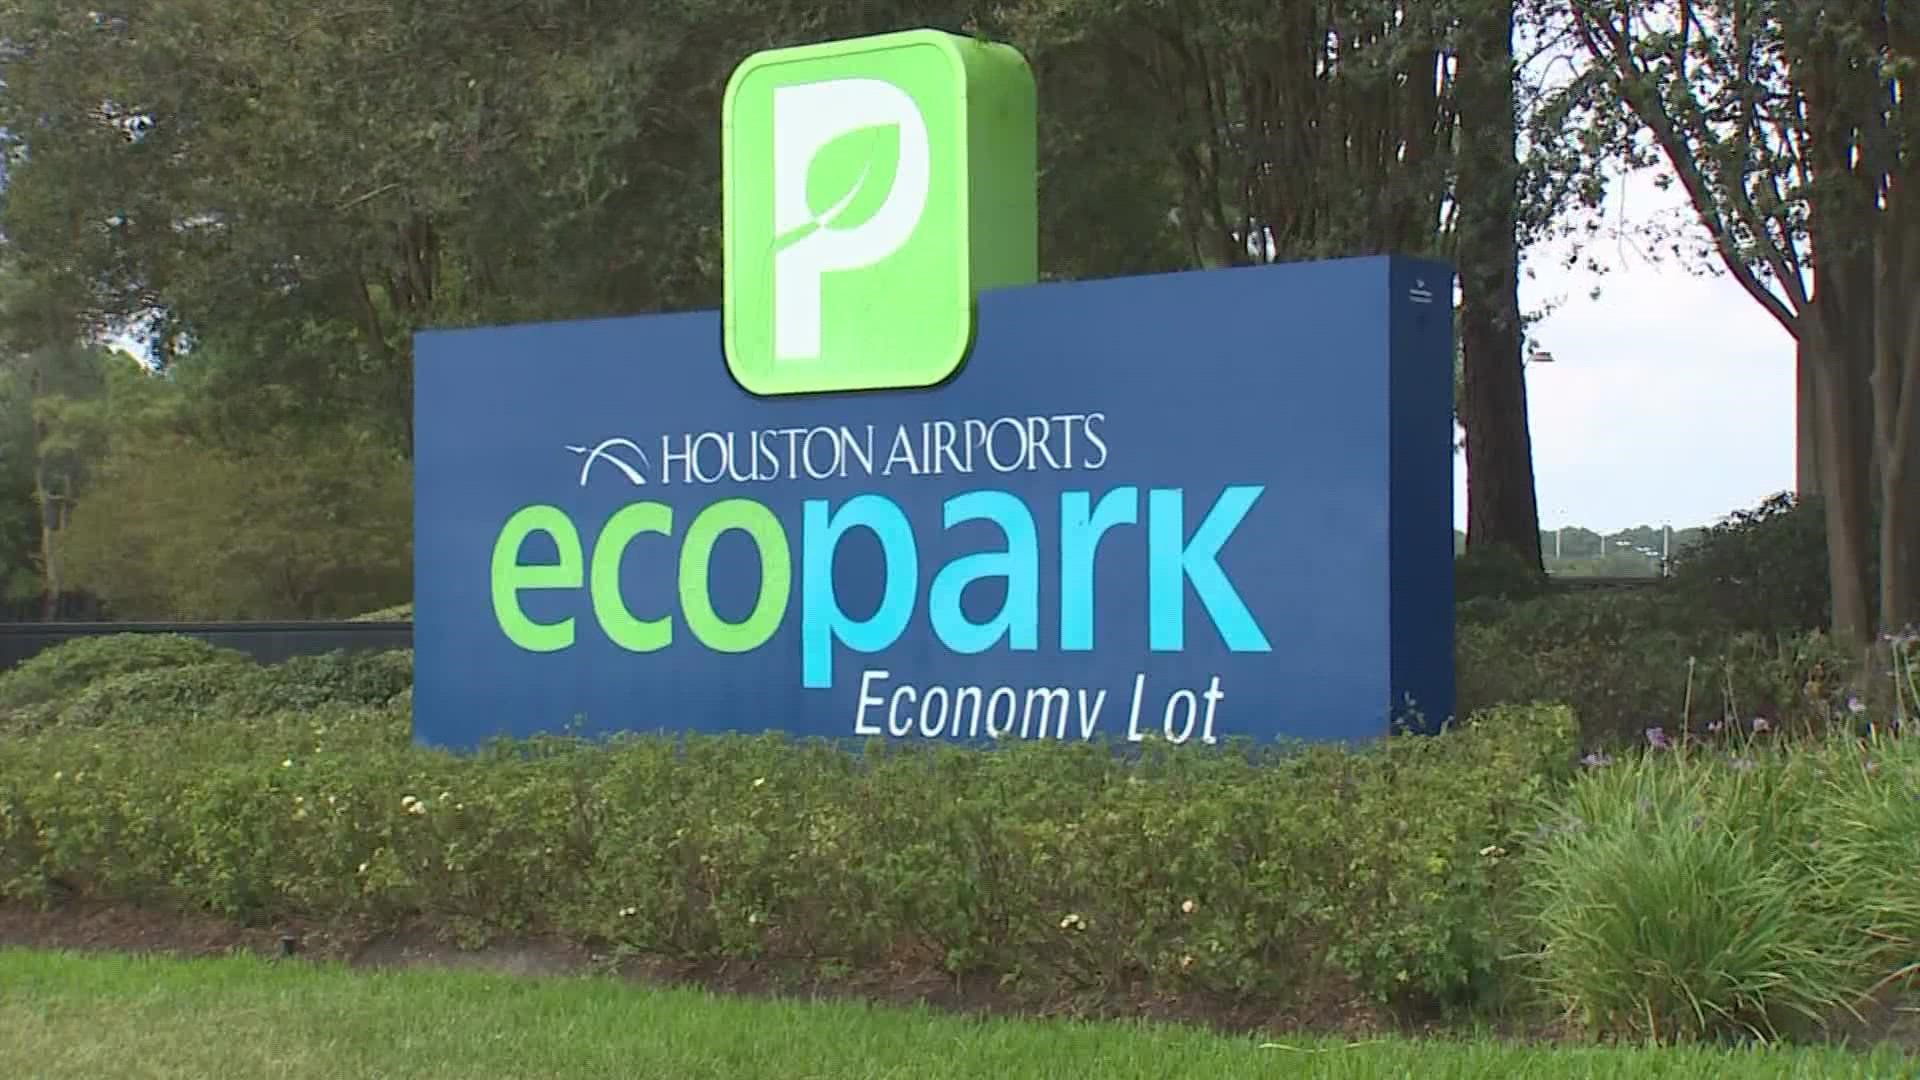 Shariq Ghani said he parked at IAH's Ecopark lot when he went out of town for a business trip. When he got home, he realized his catalytic converter was gone.